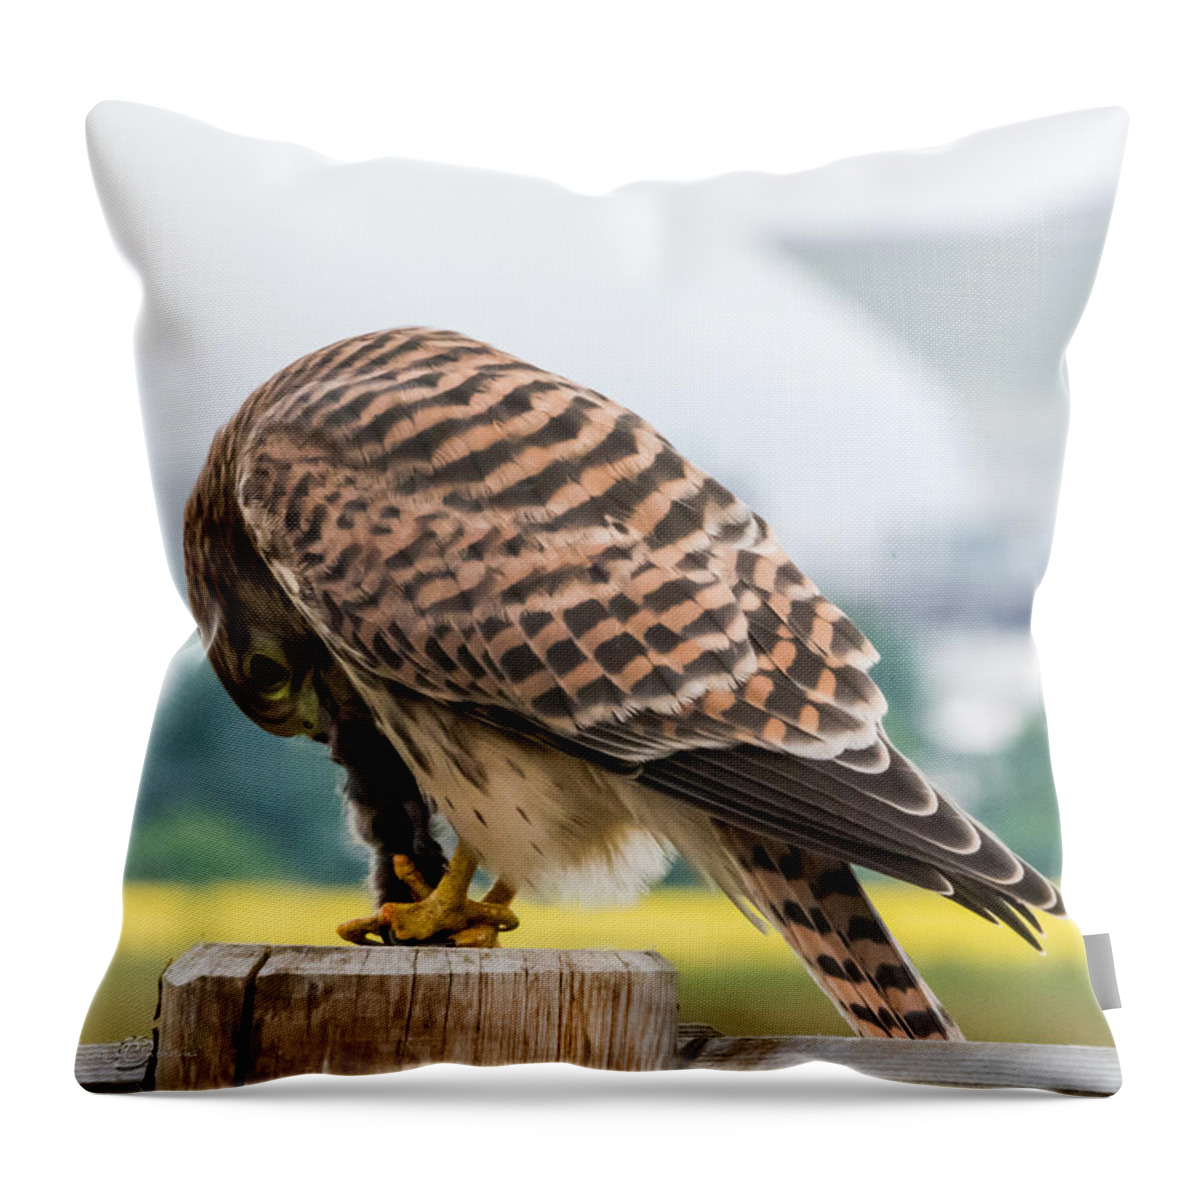 Wildlife In The City Throw Pillow featuring the photograph Wildlife in the City by Torbjorn Swenelius